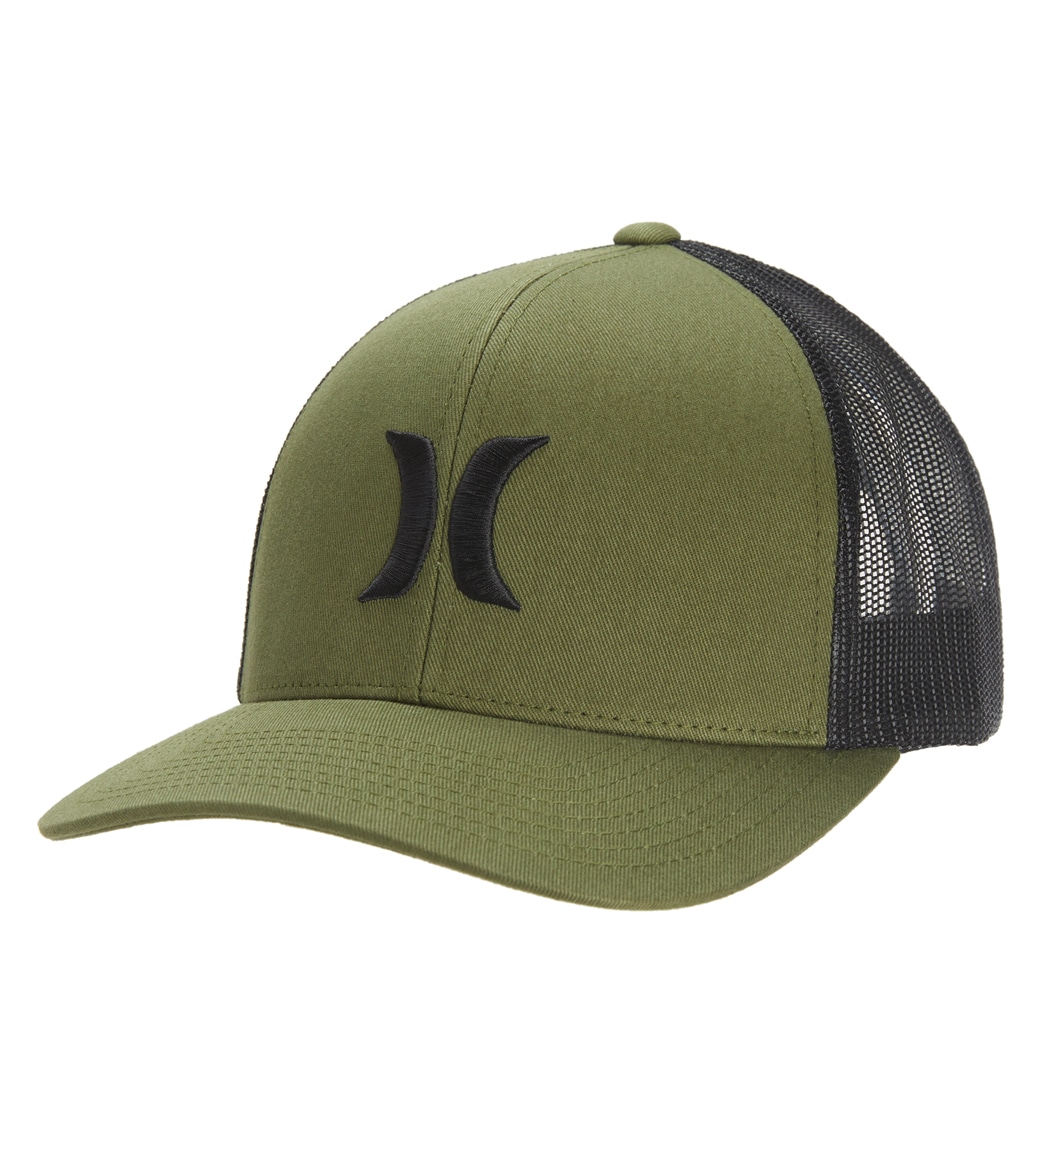 Hurley Men's Del Mar Trucker Hat - Olive One Size Cotton/Polyester - Swimoutlet.com